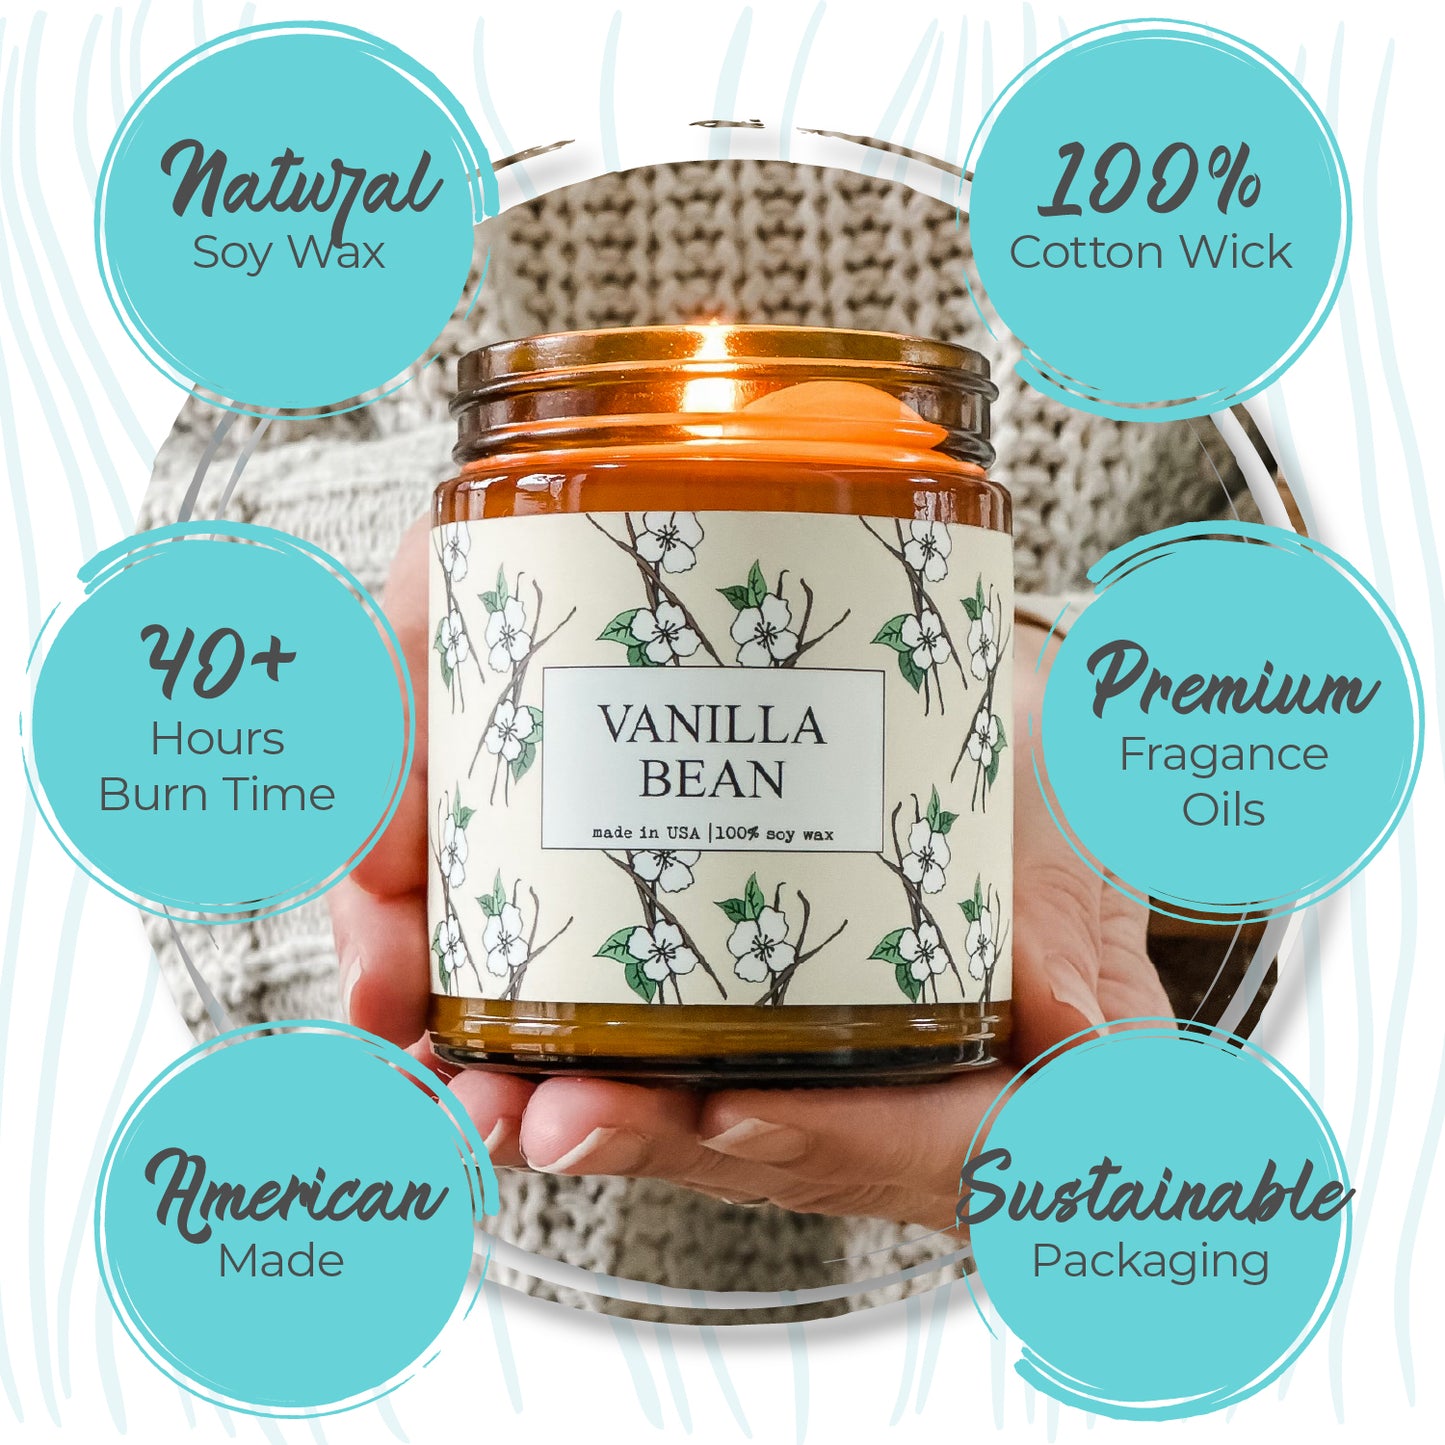 Happy Anniversary - 9oz Glass Jar Soy Candle - Forest Pine Scent